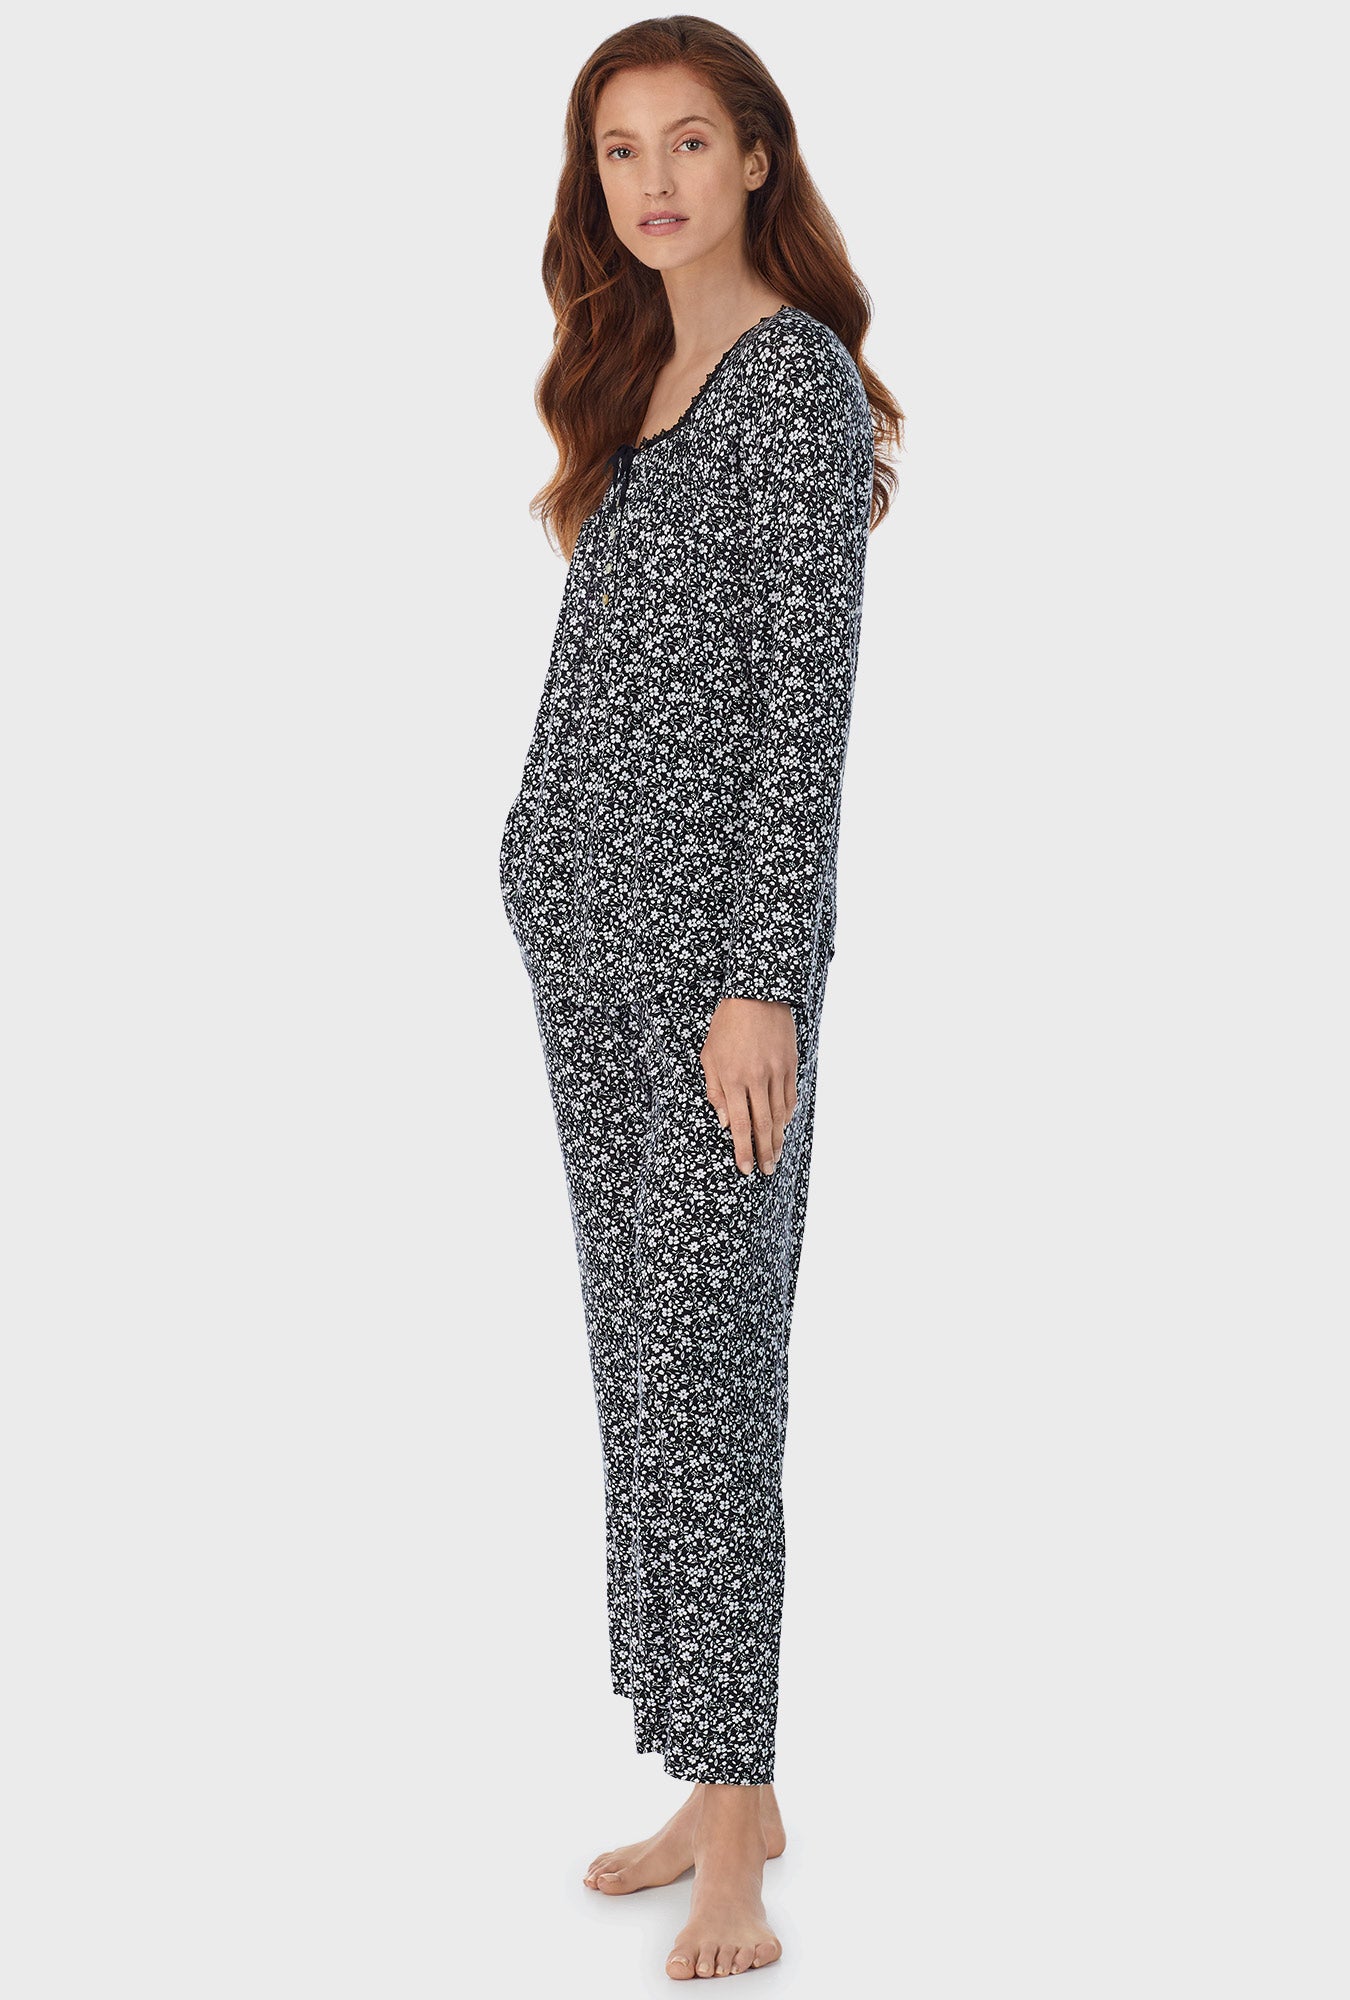 A lady wearing black long pajama set with midnight disty  print